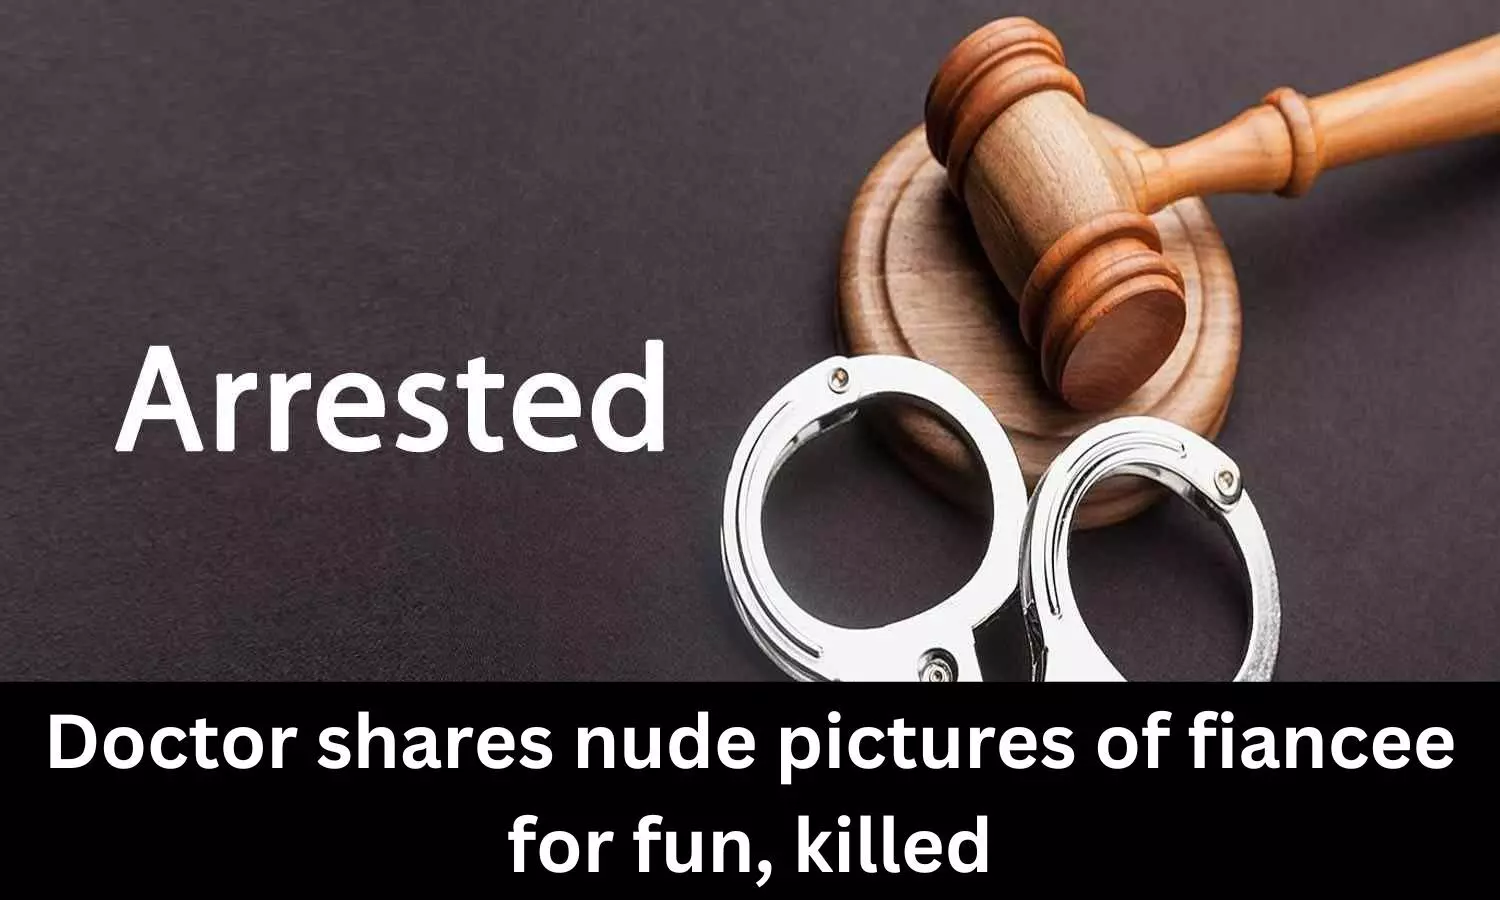 Bengaluru: Doctor shares nude pictures of fiancee for fun, killed